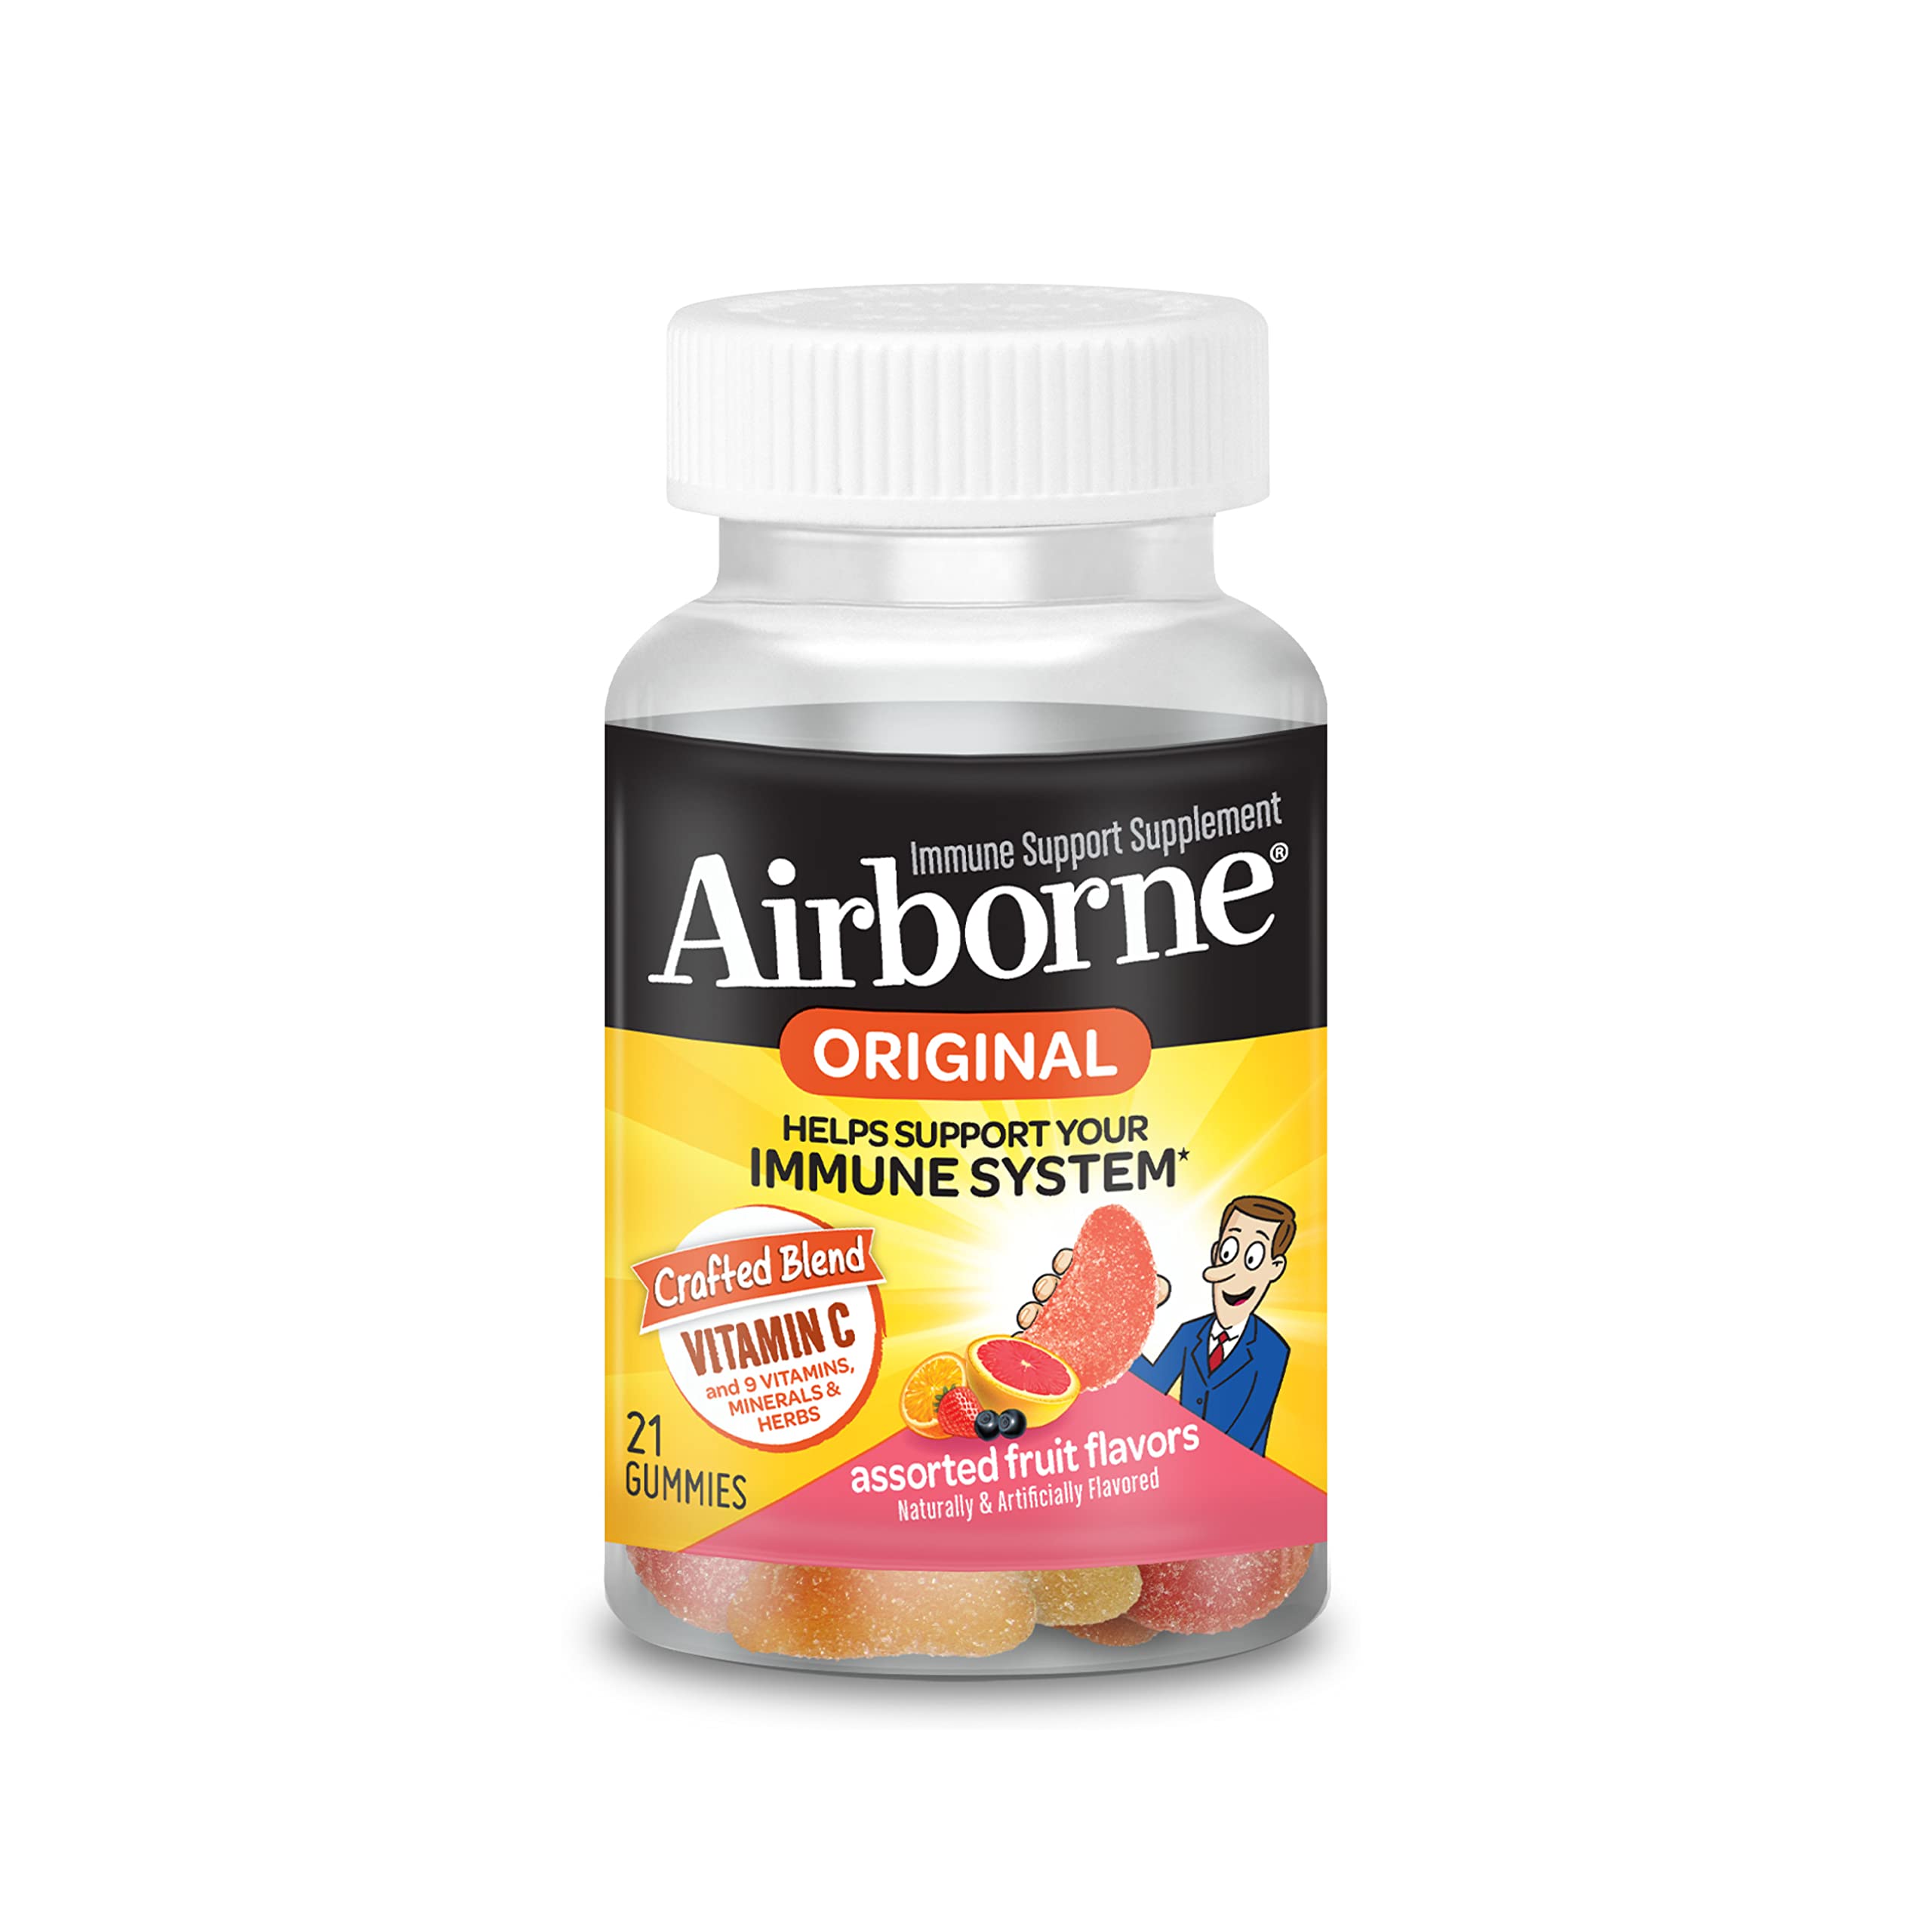 Airborne 750mg Vitamin C Gummies For Adults, Immune Support Supplement with Powerful Antioxidants Vitamins A C & E - 21 Gummies, Assorted Fruit Flavor